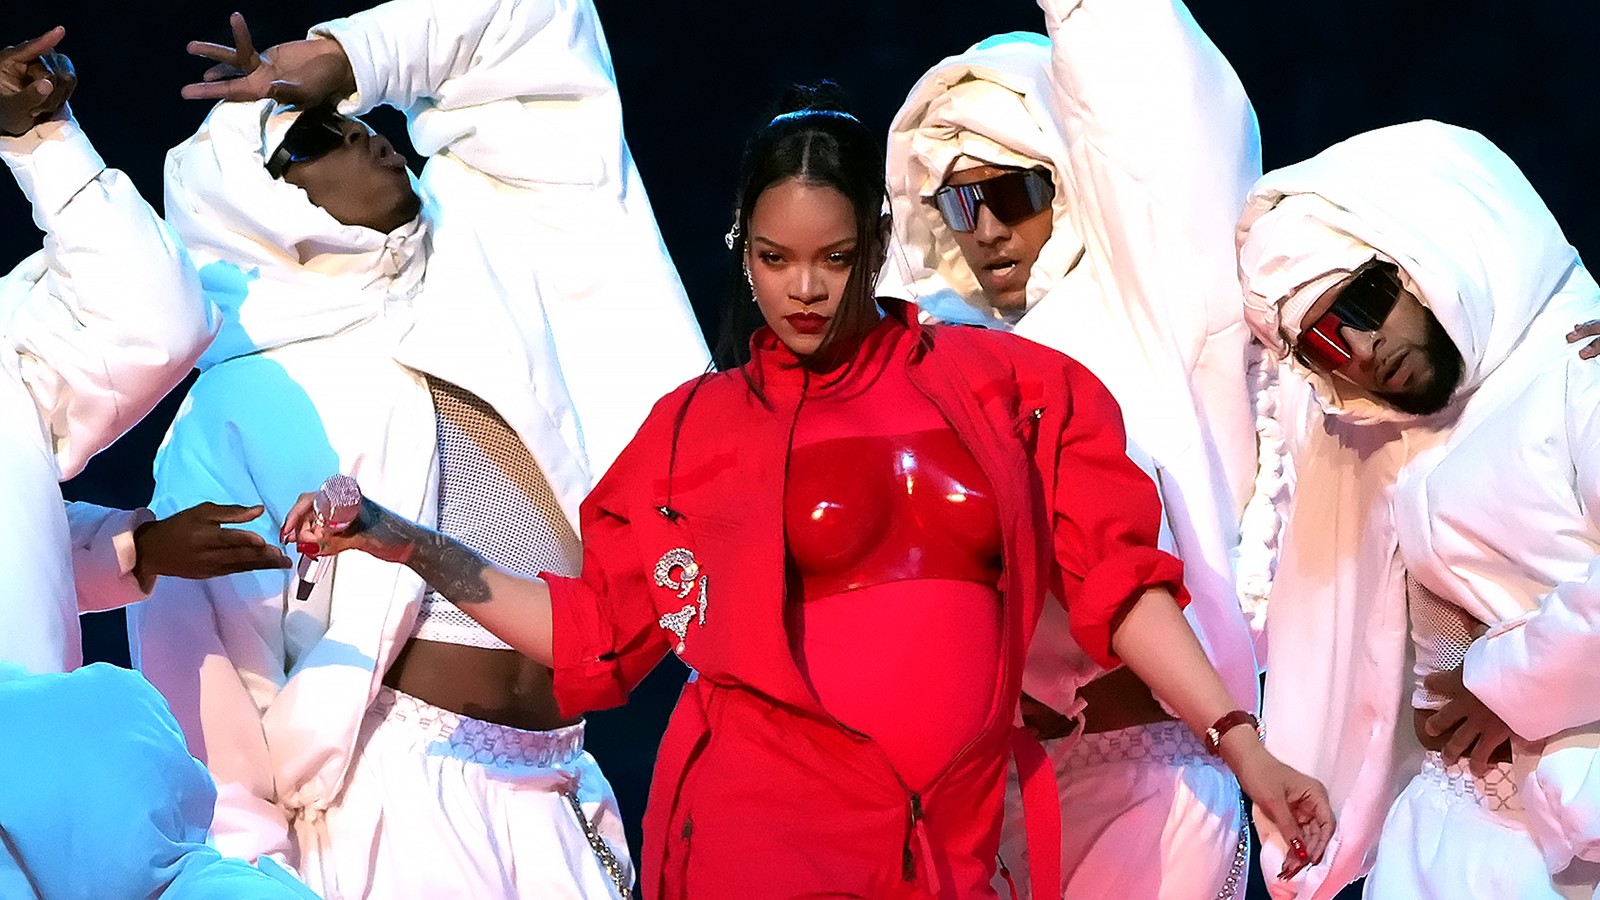 The Sleek Truth in Rihanna's Super Bowl Halftime Show